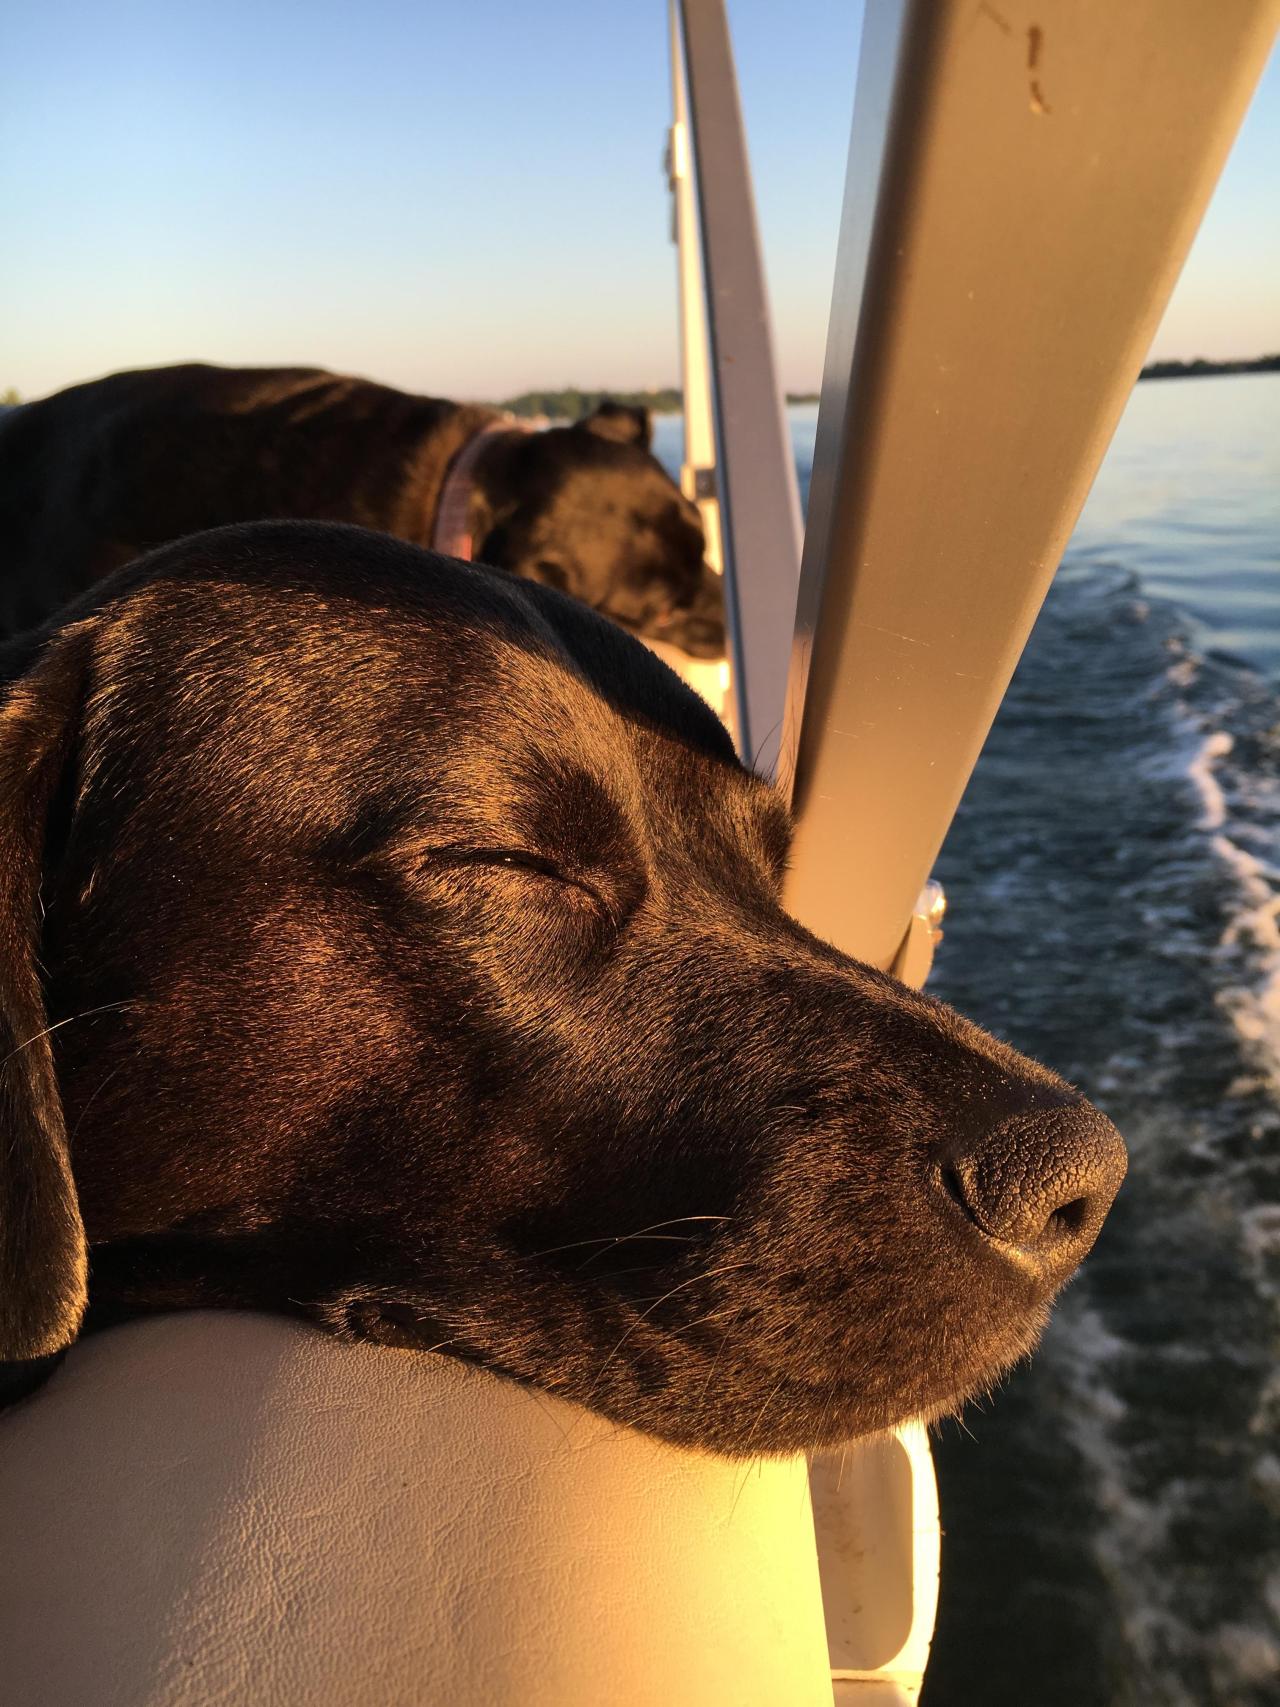 awwww-cute:  7 miles of glass, in the afternoon sun, after a long day at the sandbar